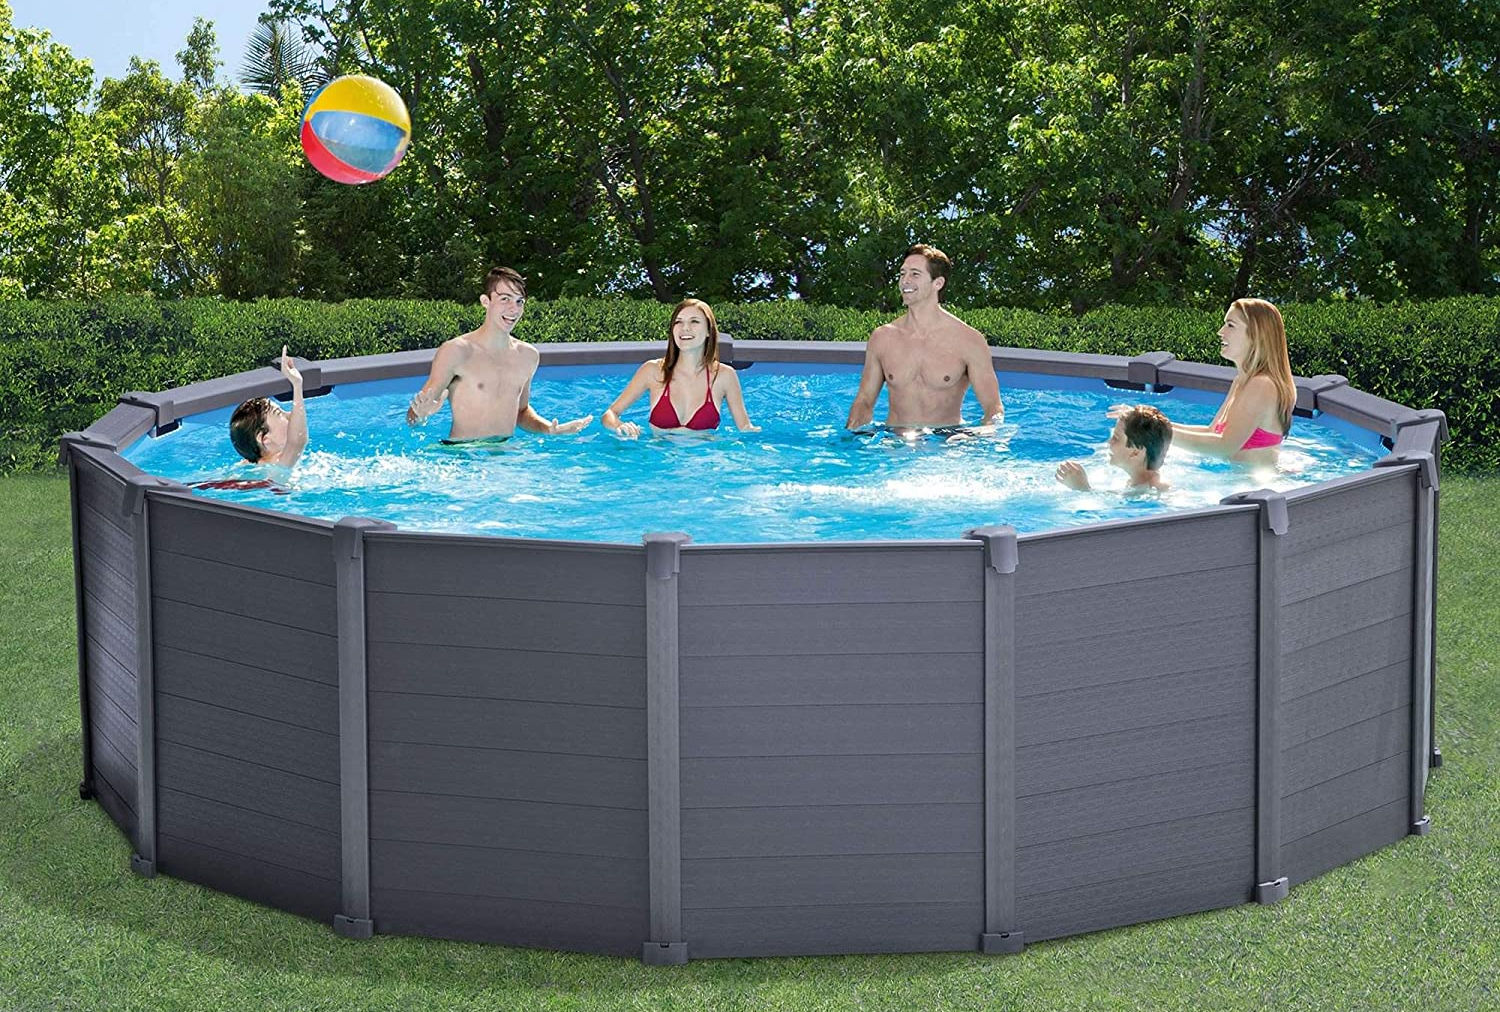 Tips for Above Ground Pool Safety